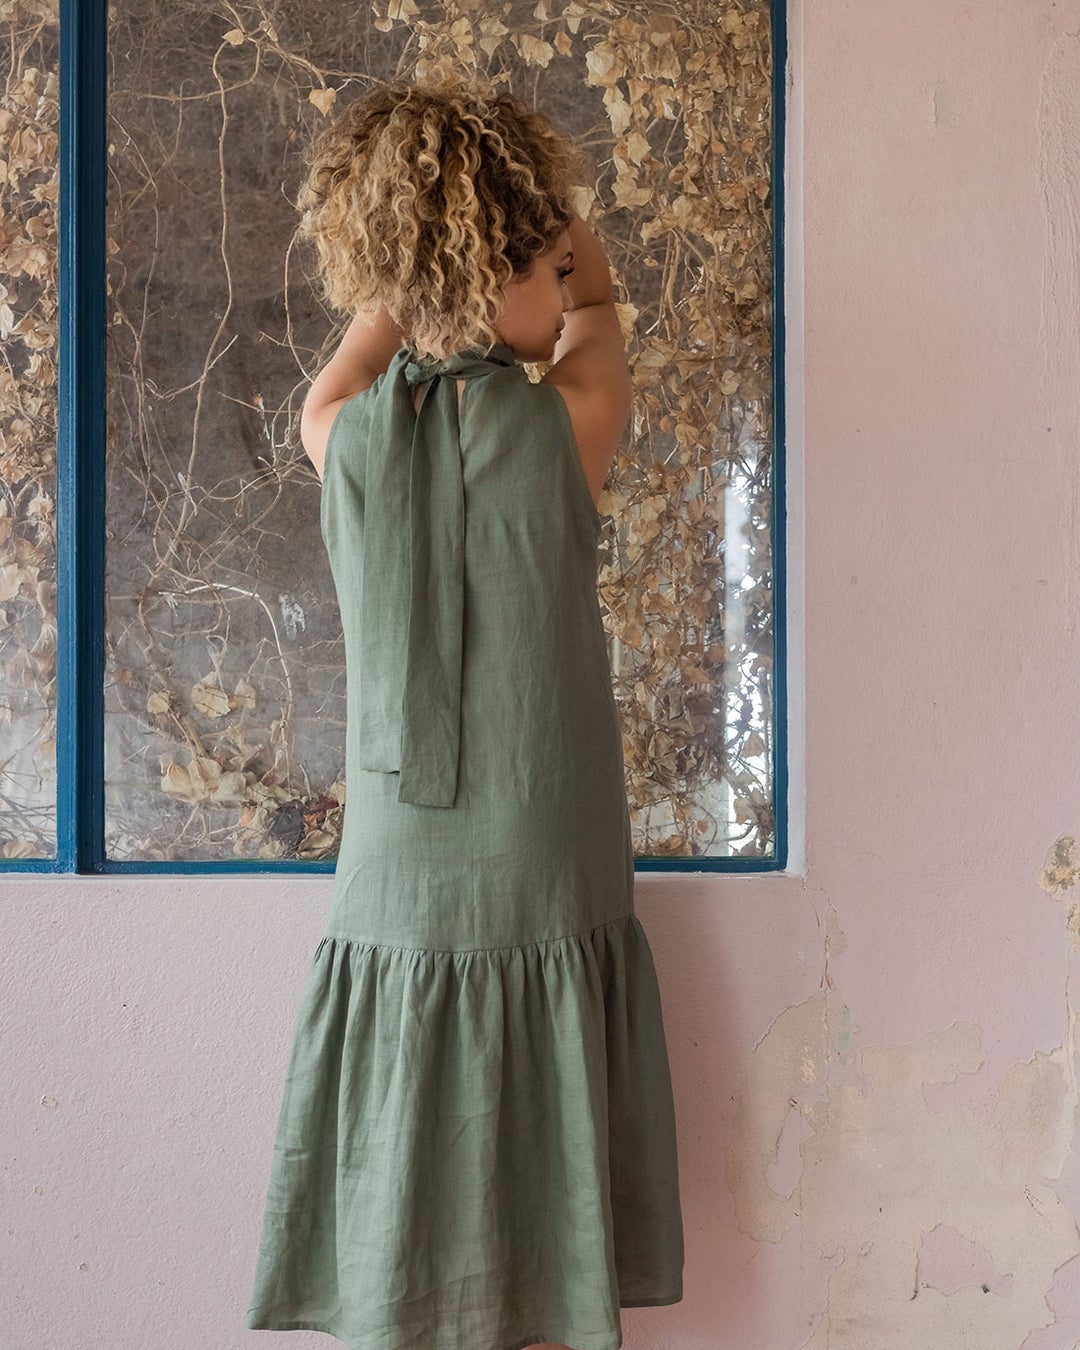 We see a woman from behind, she holds her hair up and looks aside while wearing a green linen dress. 